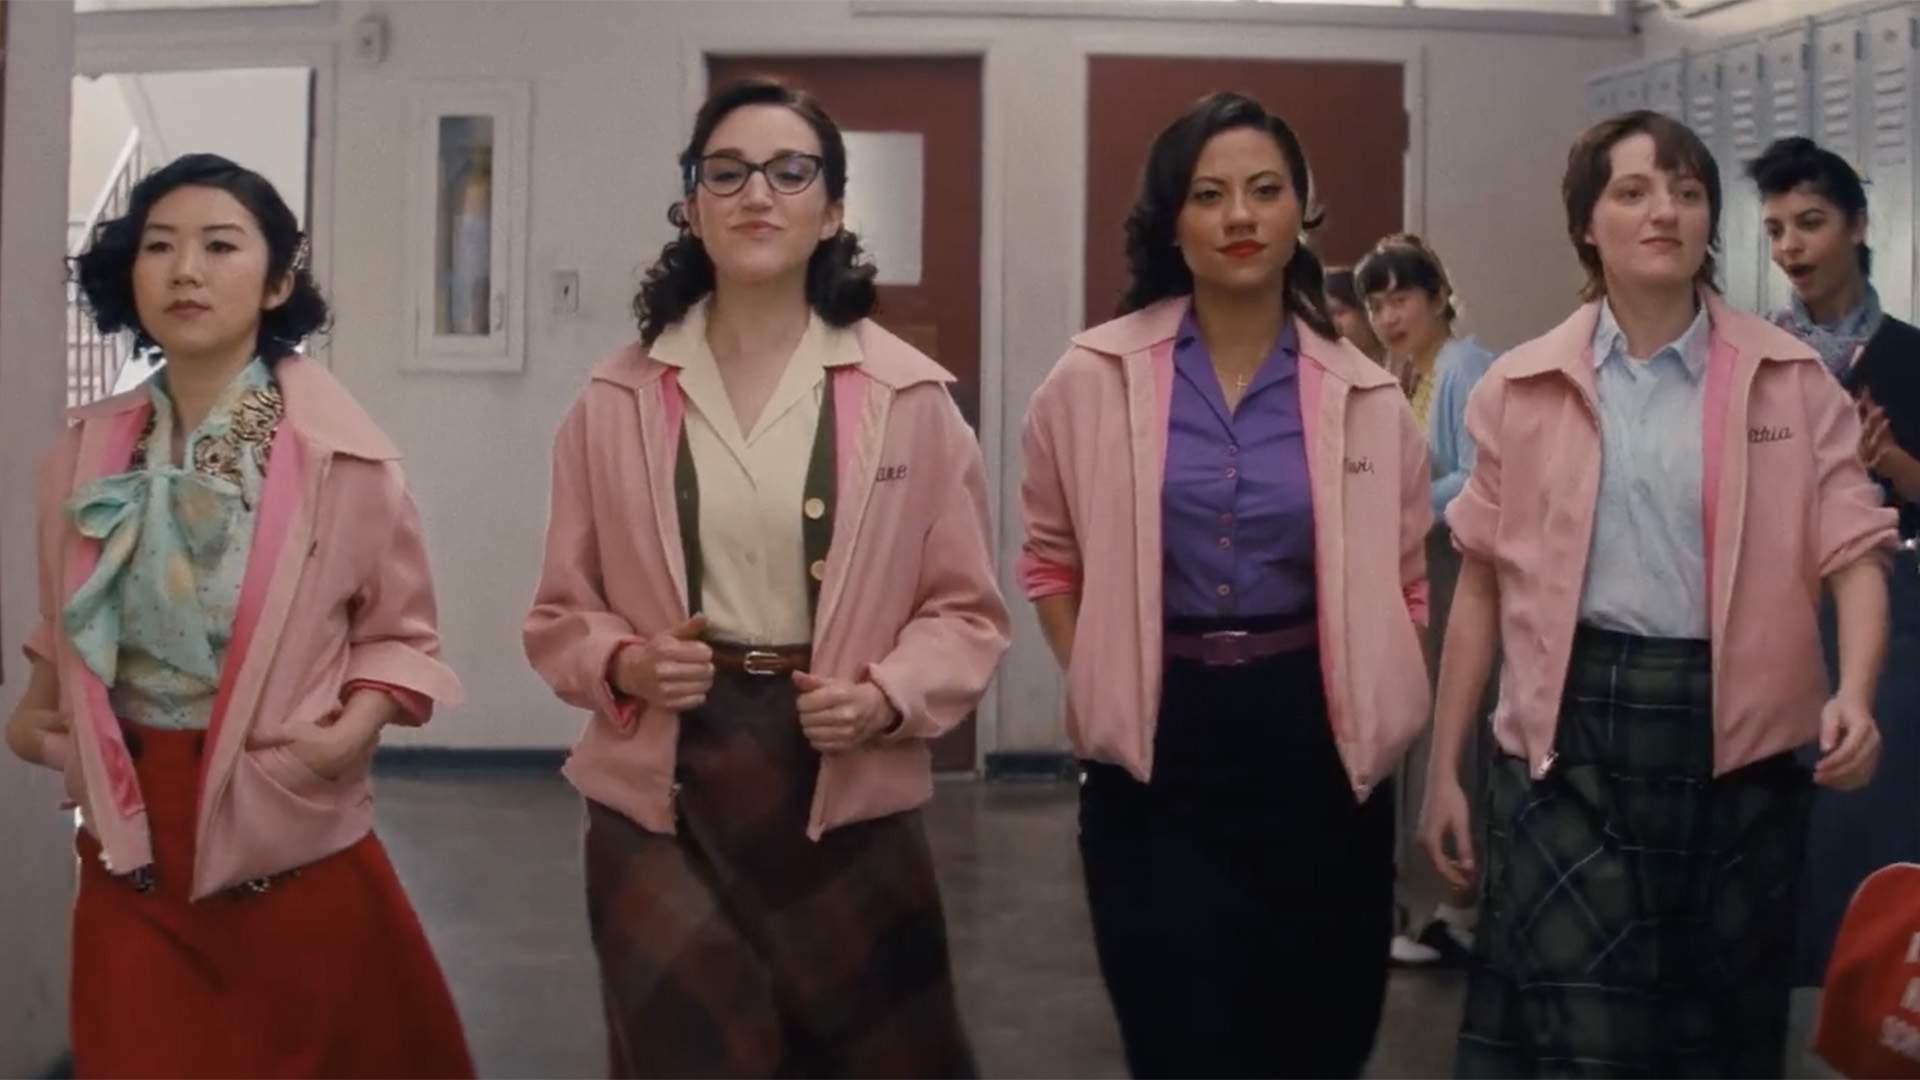 Welcome Back to Rydell High: The Full Trailer for 'Grease' Prequel Series 'Rise of the Pink Ladies' Is Here